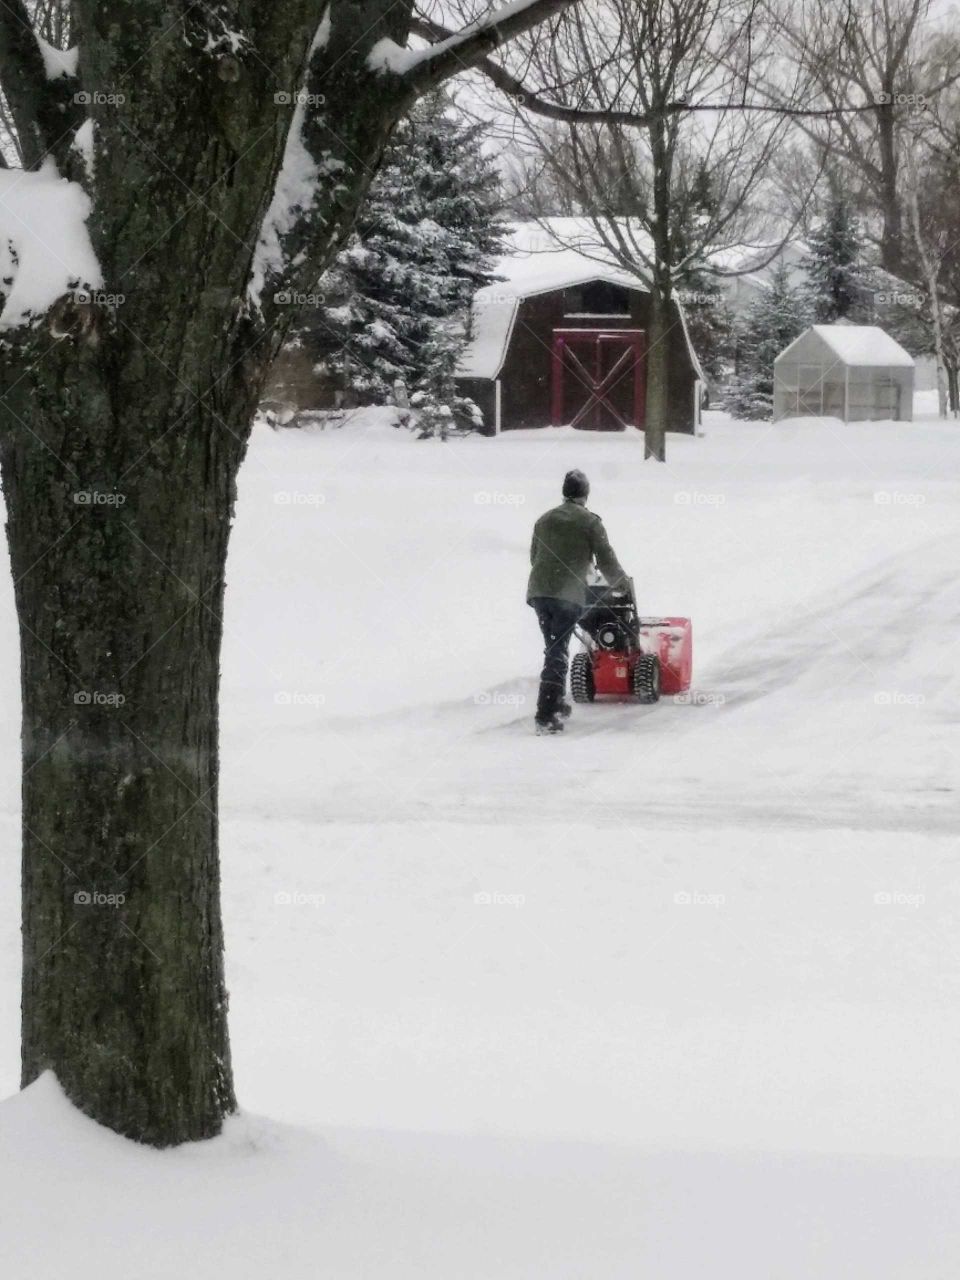 Clearing the Driveway